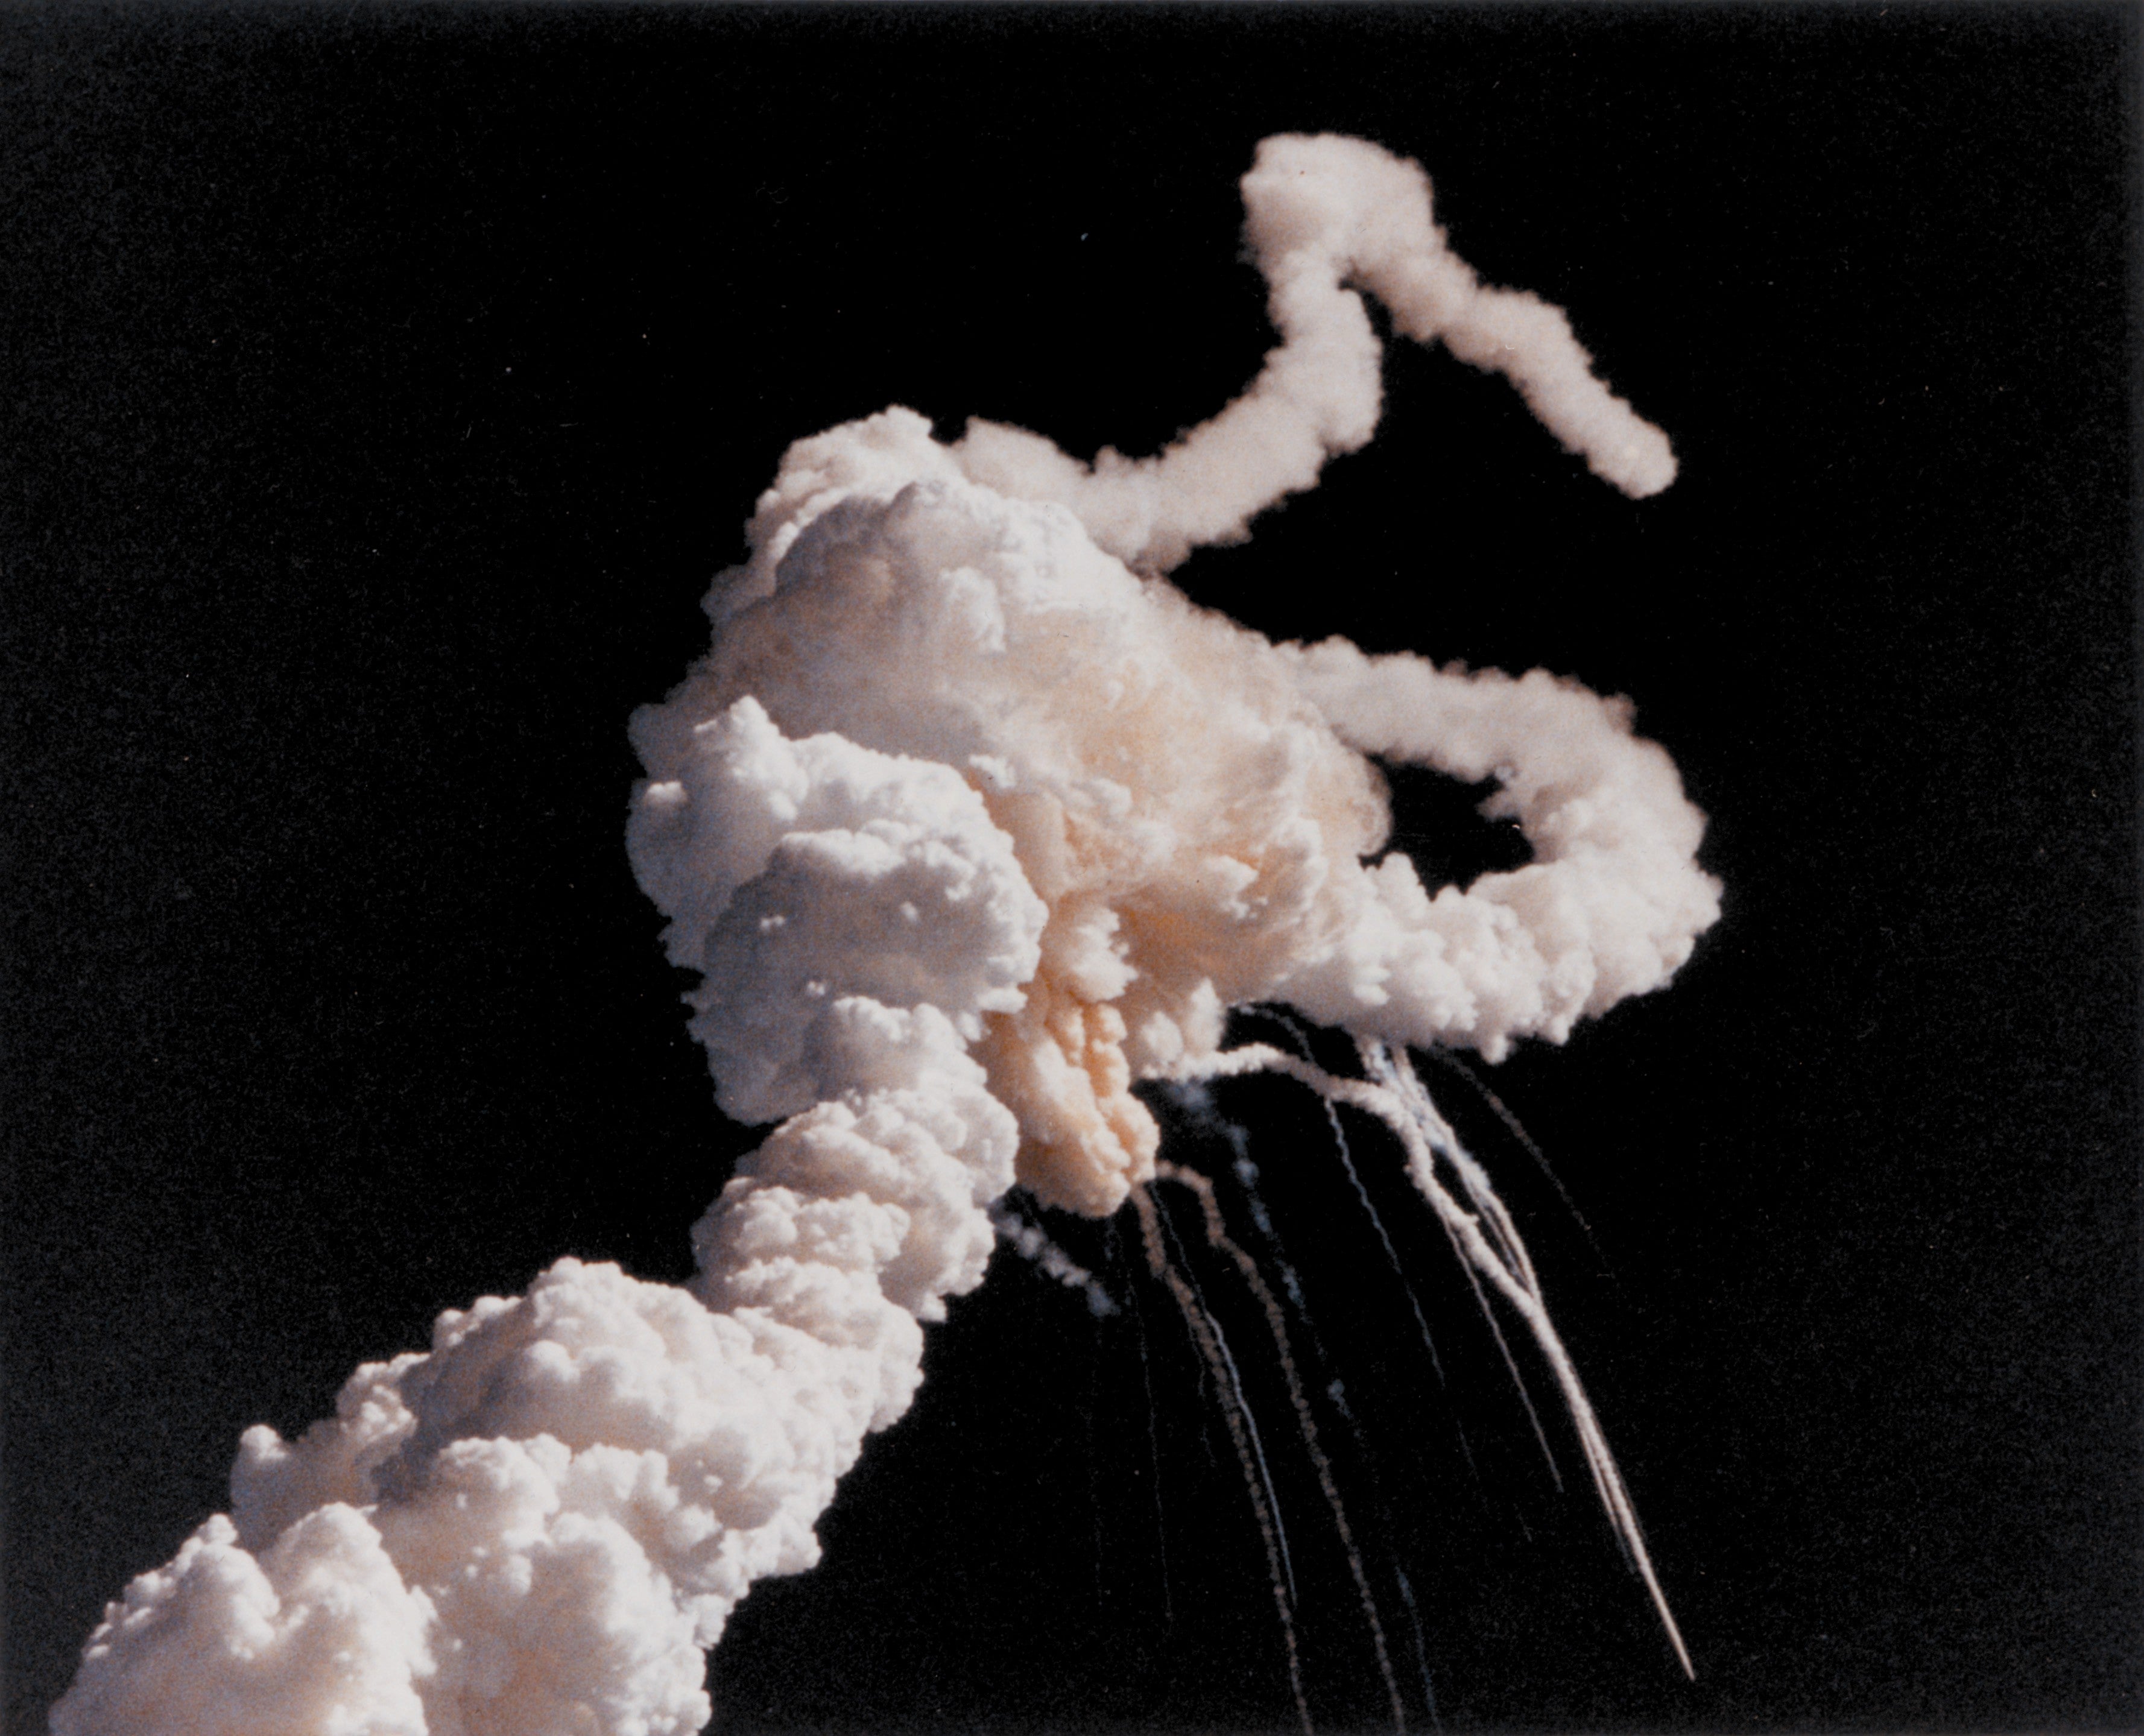 A Sober History of Shuttle Disasters is a Grim Reminder of the Dangers of Space